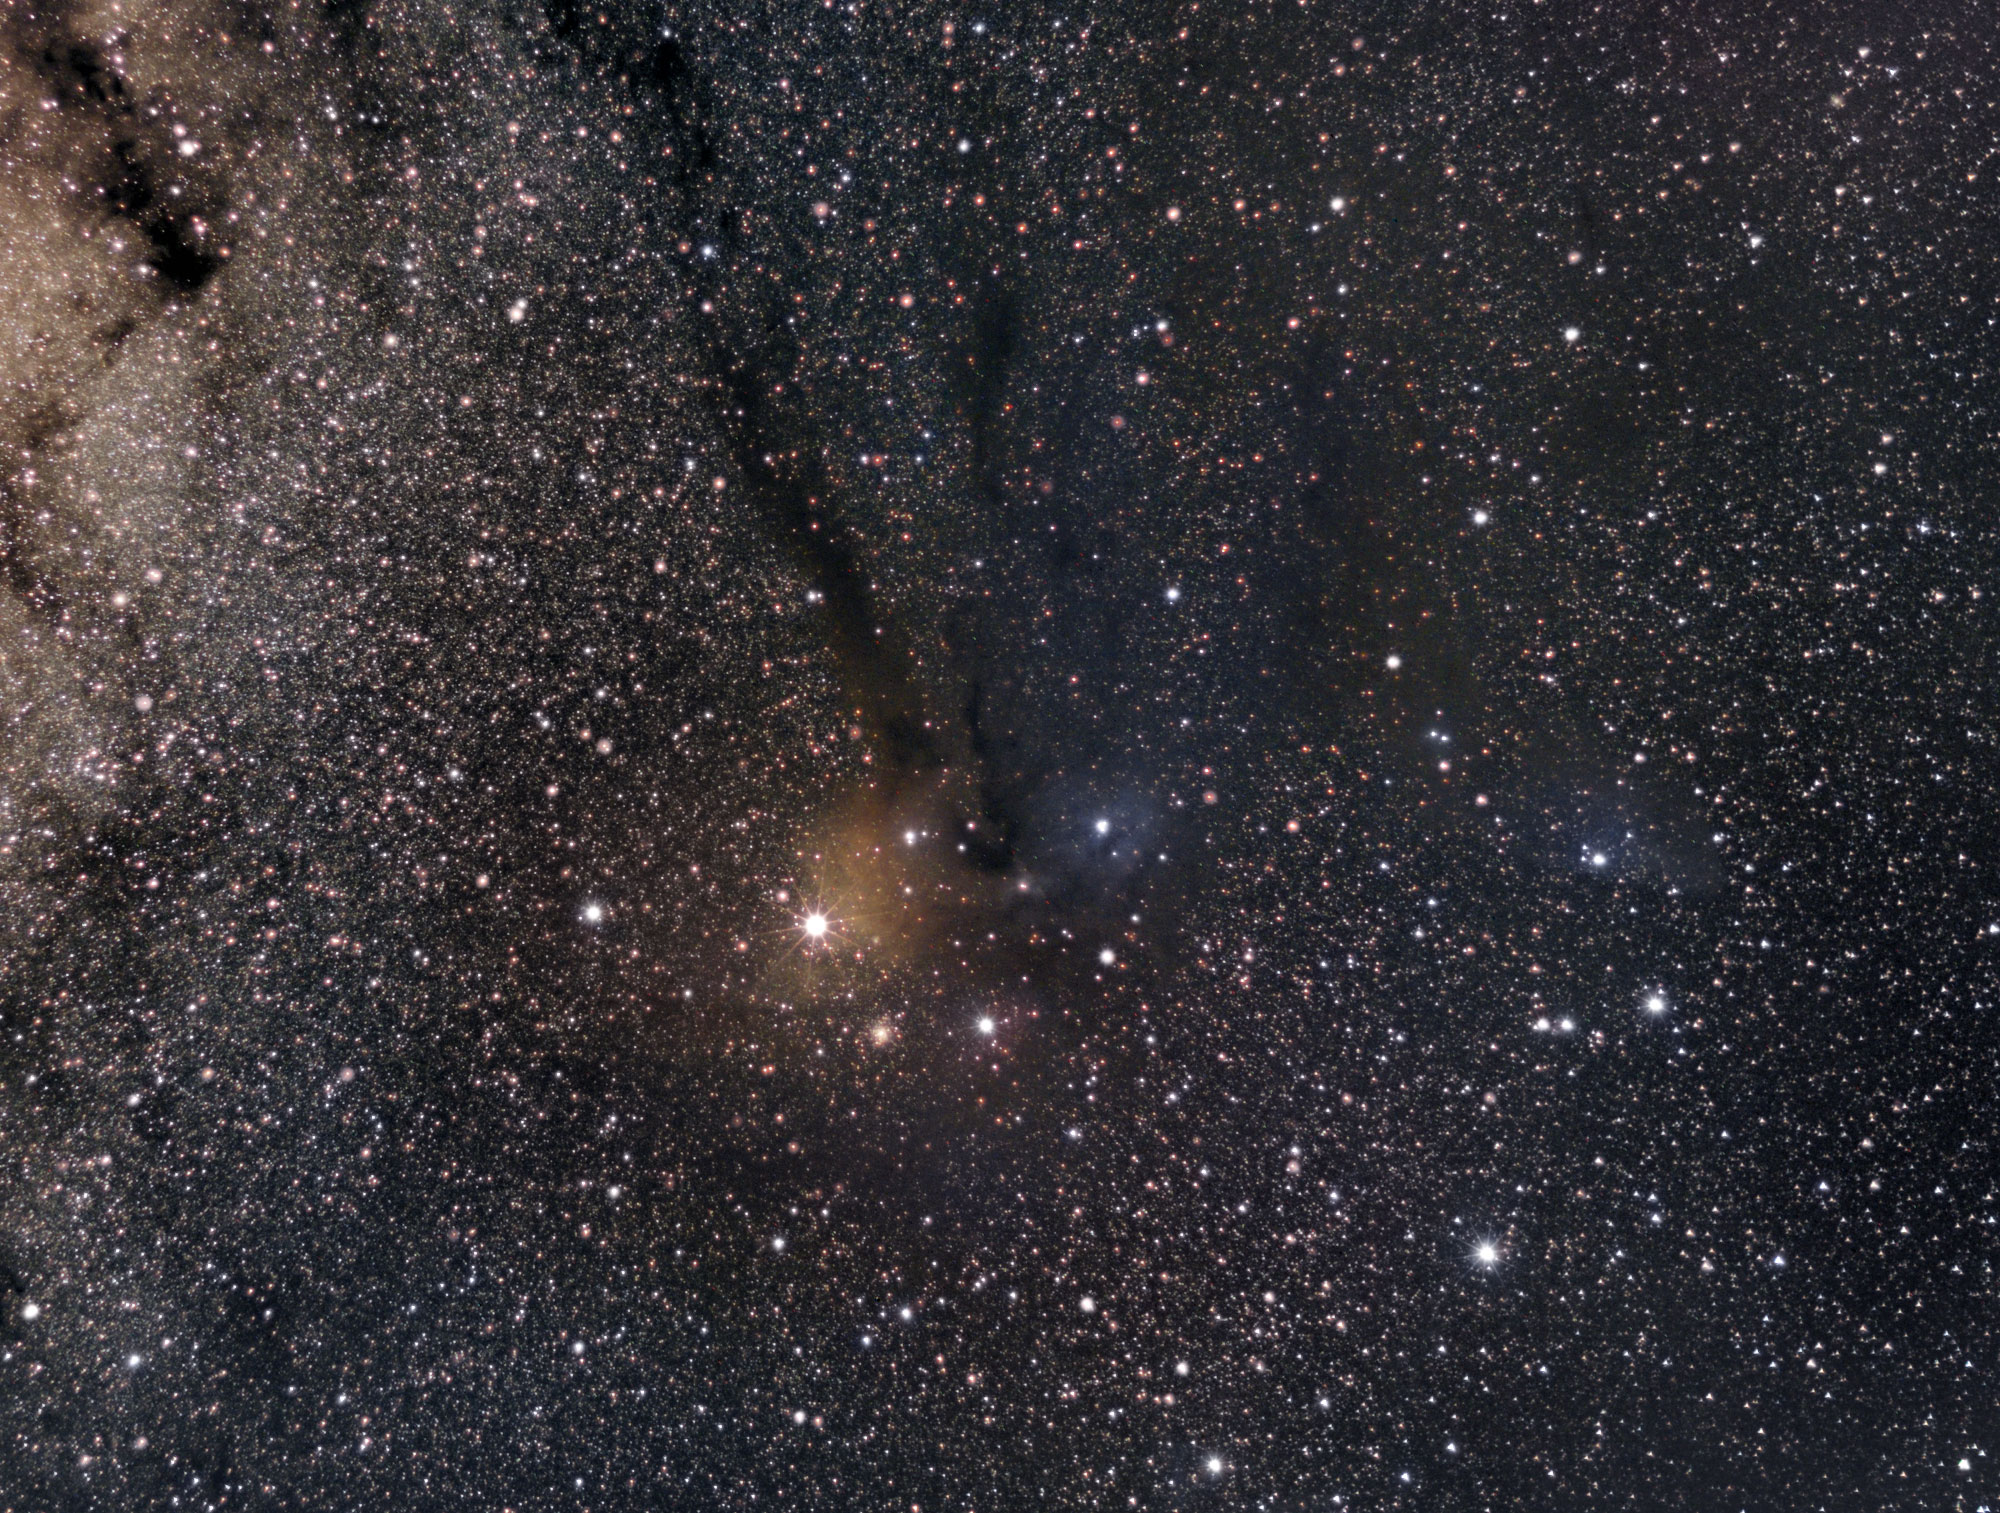 Antares wide field astrophotography using ASI 294 colour camera